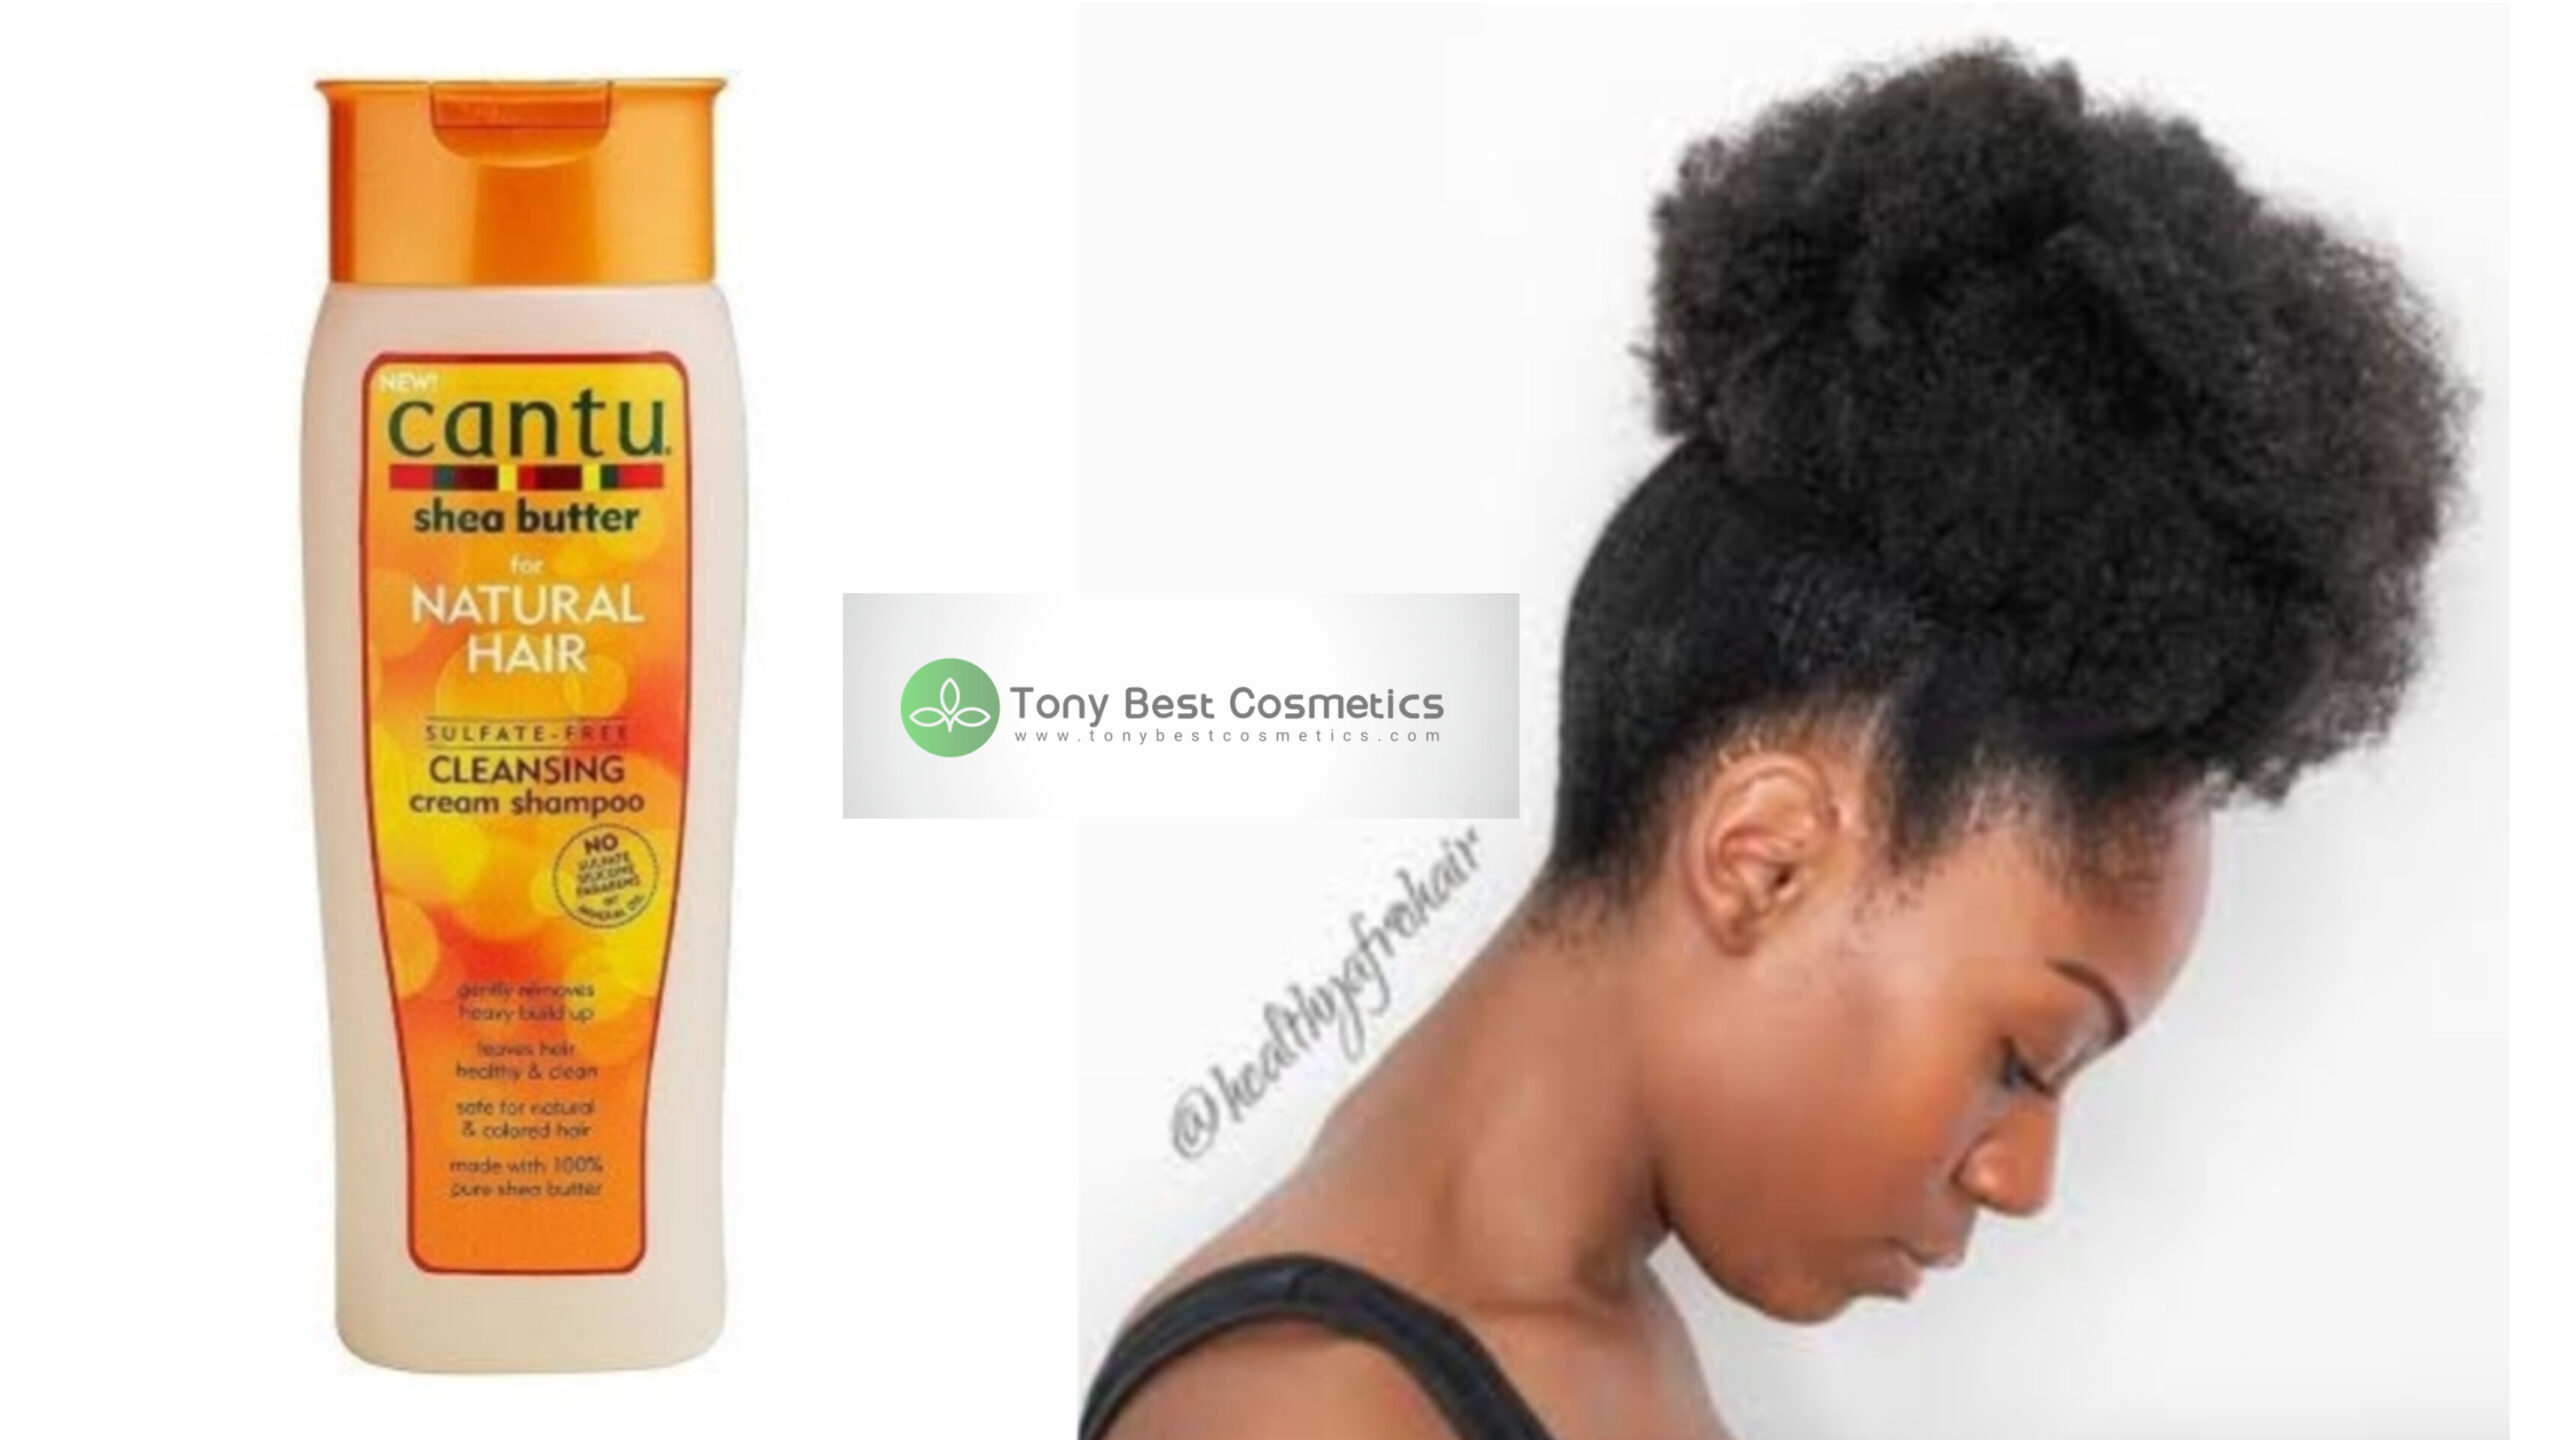 Cantu Shea Butter For Natural Hair Review